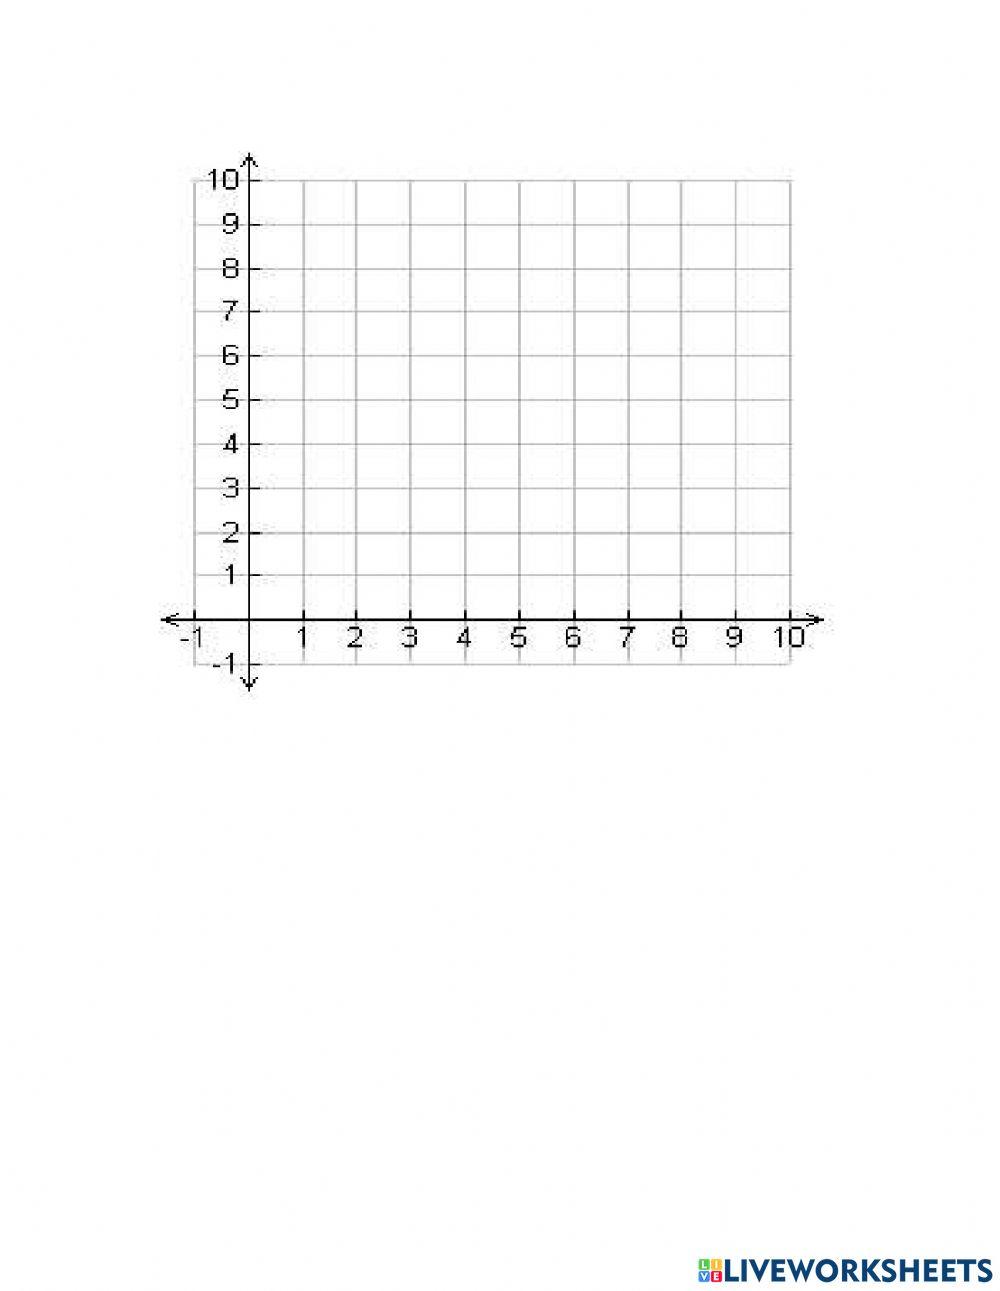 In and Out Function Tables and Graphing